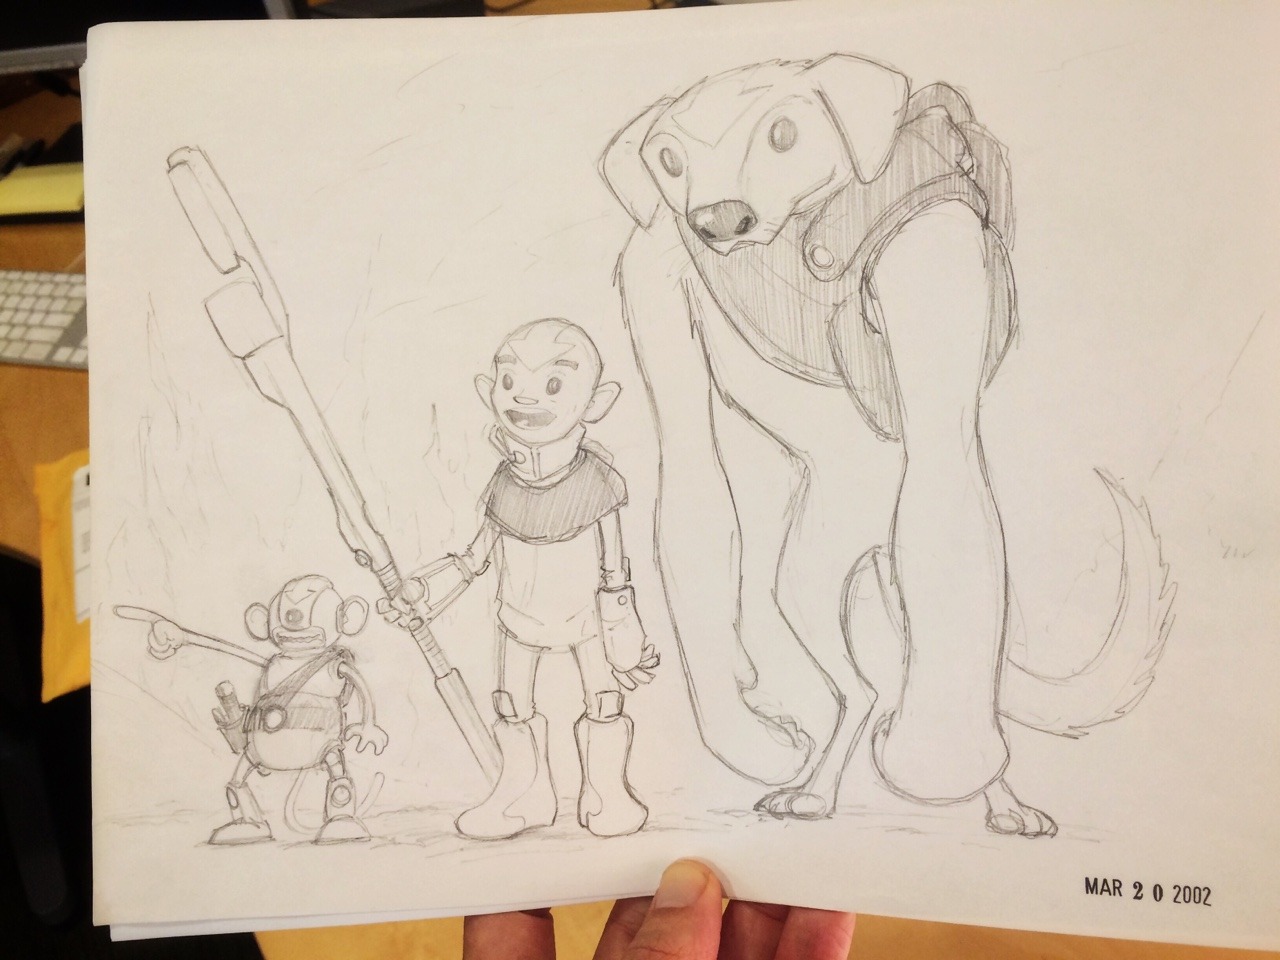 bryan konietzko — Here it is, the original of the first drawing I...